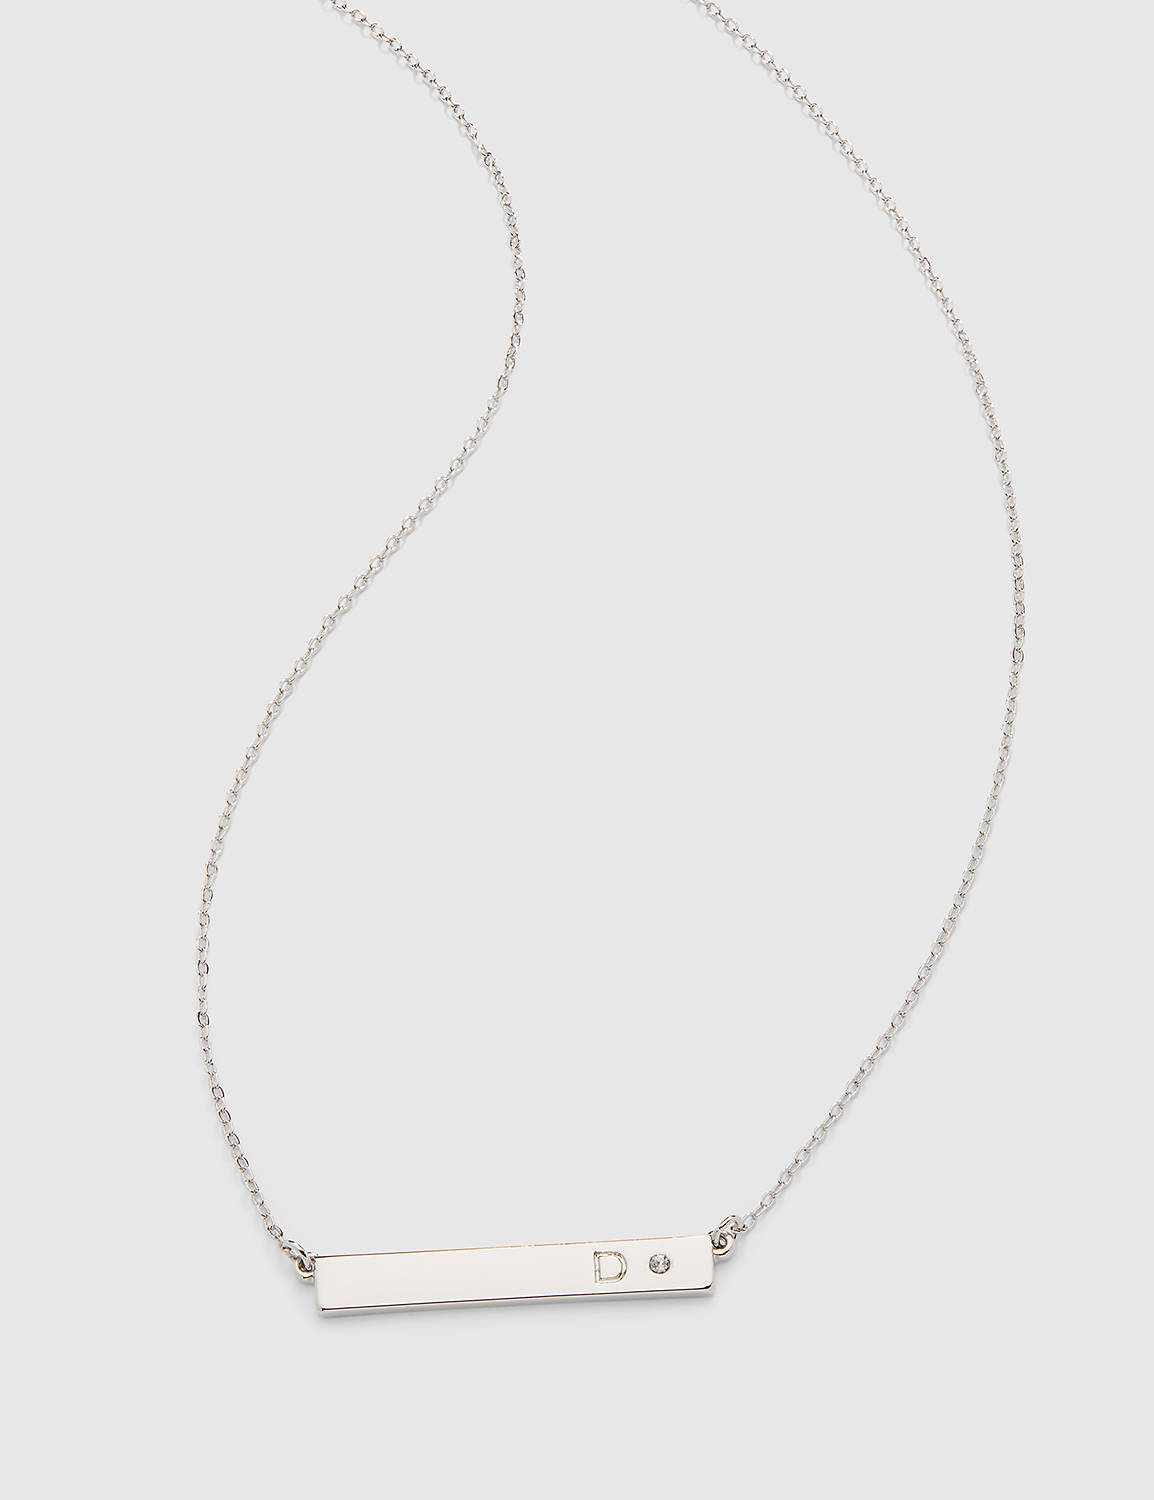 INITAL BAR NECKLACE M:Silver:ONESZ Product Image 1